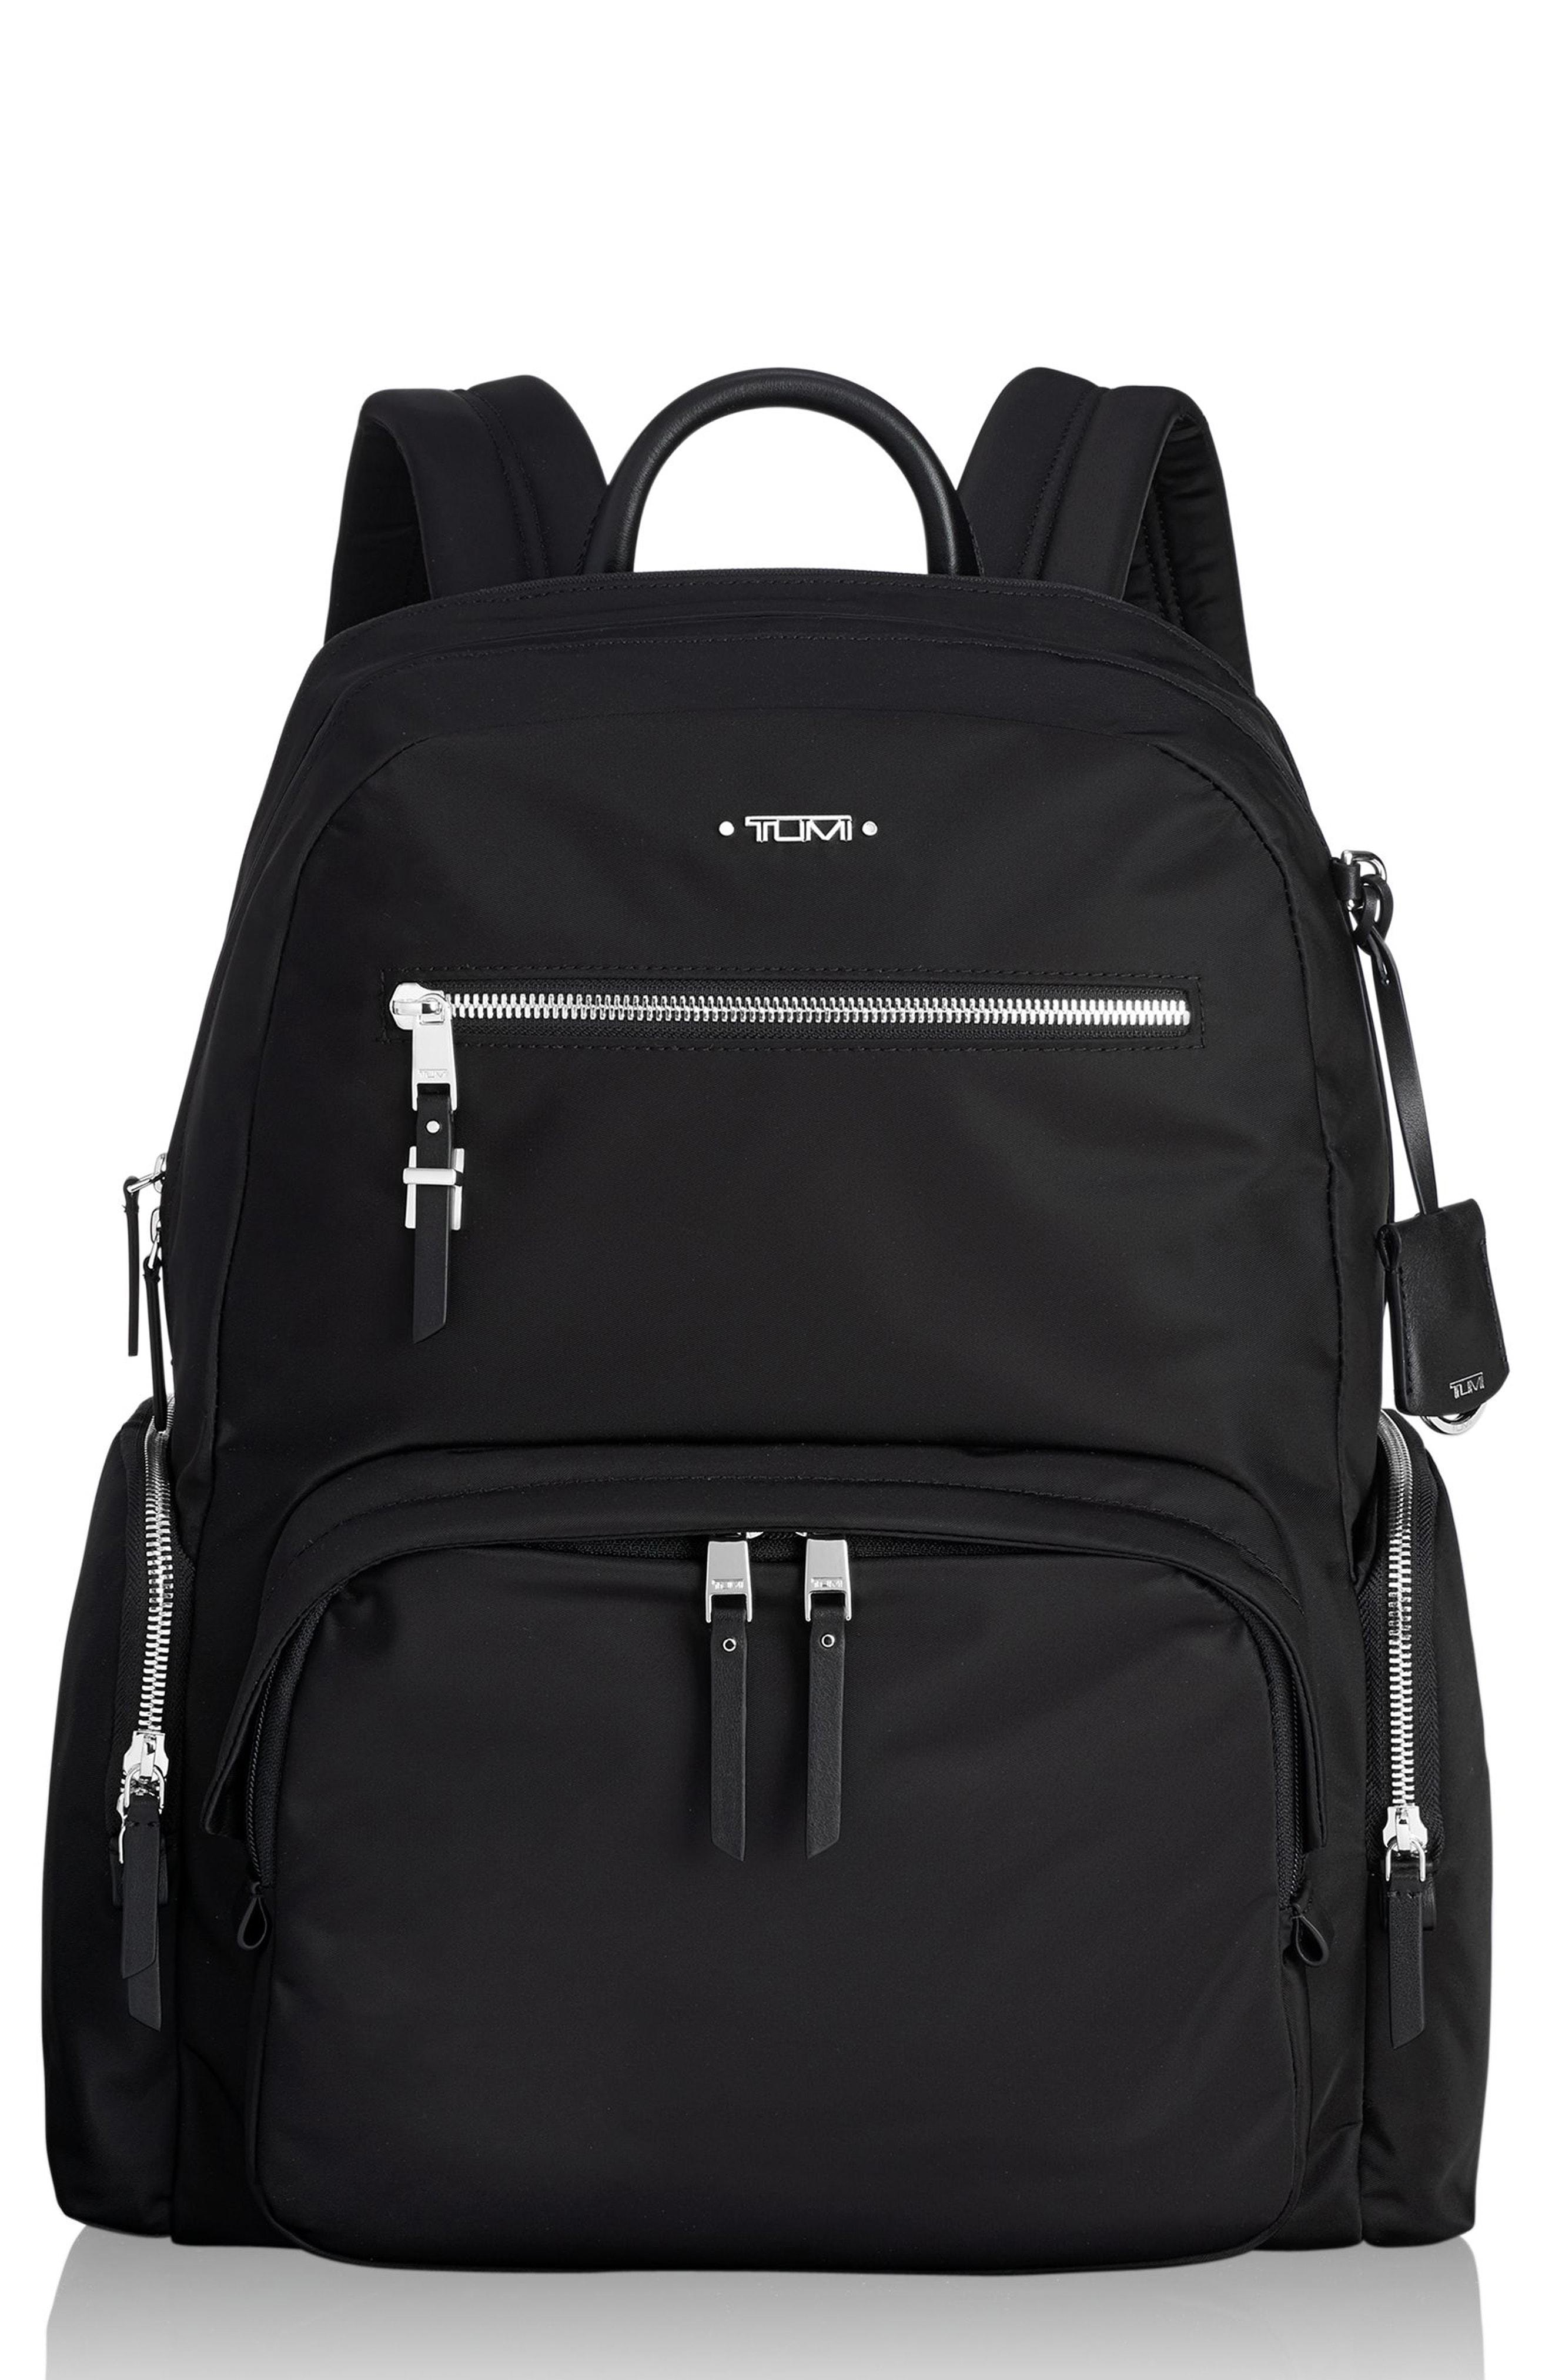 Tumi Voyager Carson Nylon Backpack in Black - Lyst